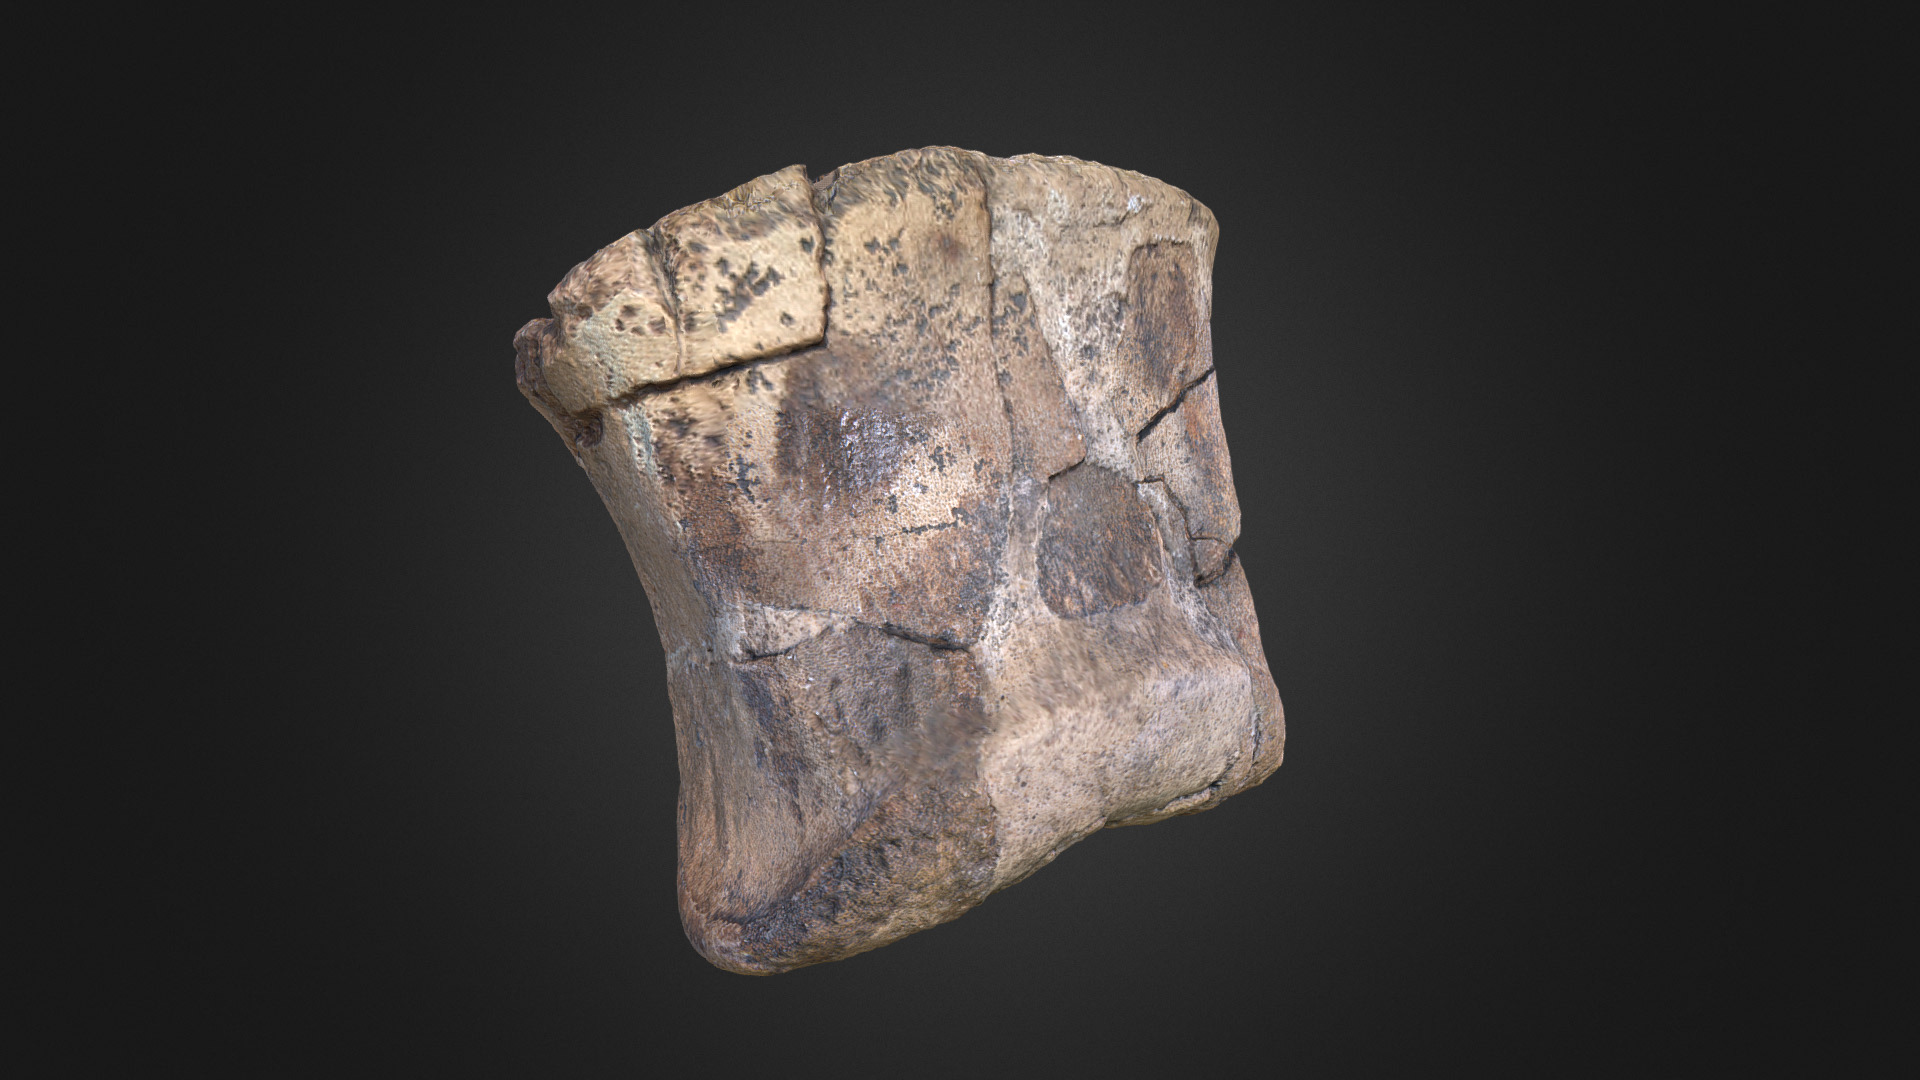 3D model Edmontosaurus Toe Bone - This is a 3D model of the Edmontosaurus Toe Bone. The 3D model is about a stone with a face carved into it.